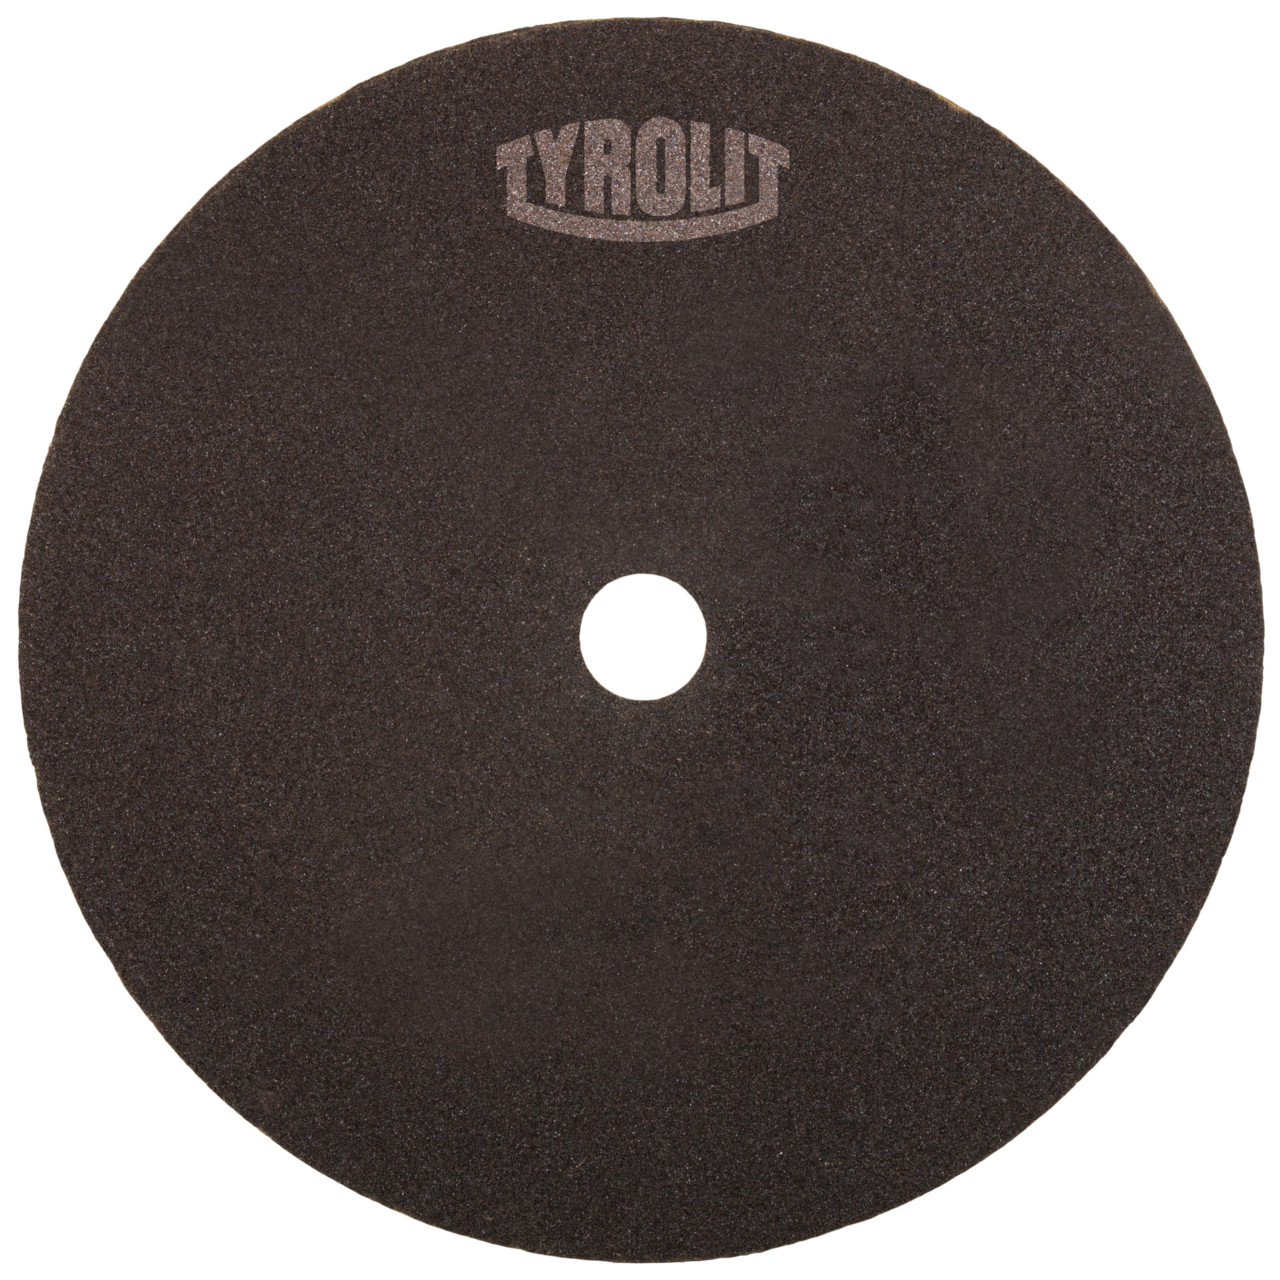 Tyrolit Cutting disc for cutting and saw sharpening DxDxH 250x1.6x32 For steel and HSS, shape: 41N - straight version (non-woven cutting disc), Art. 834839